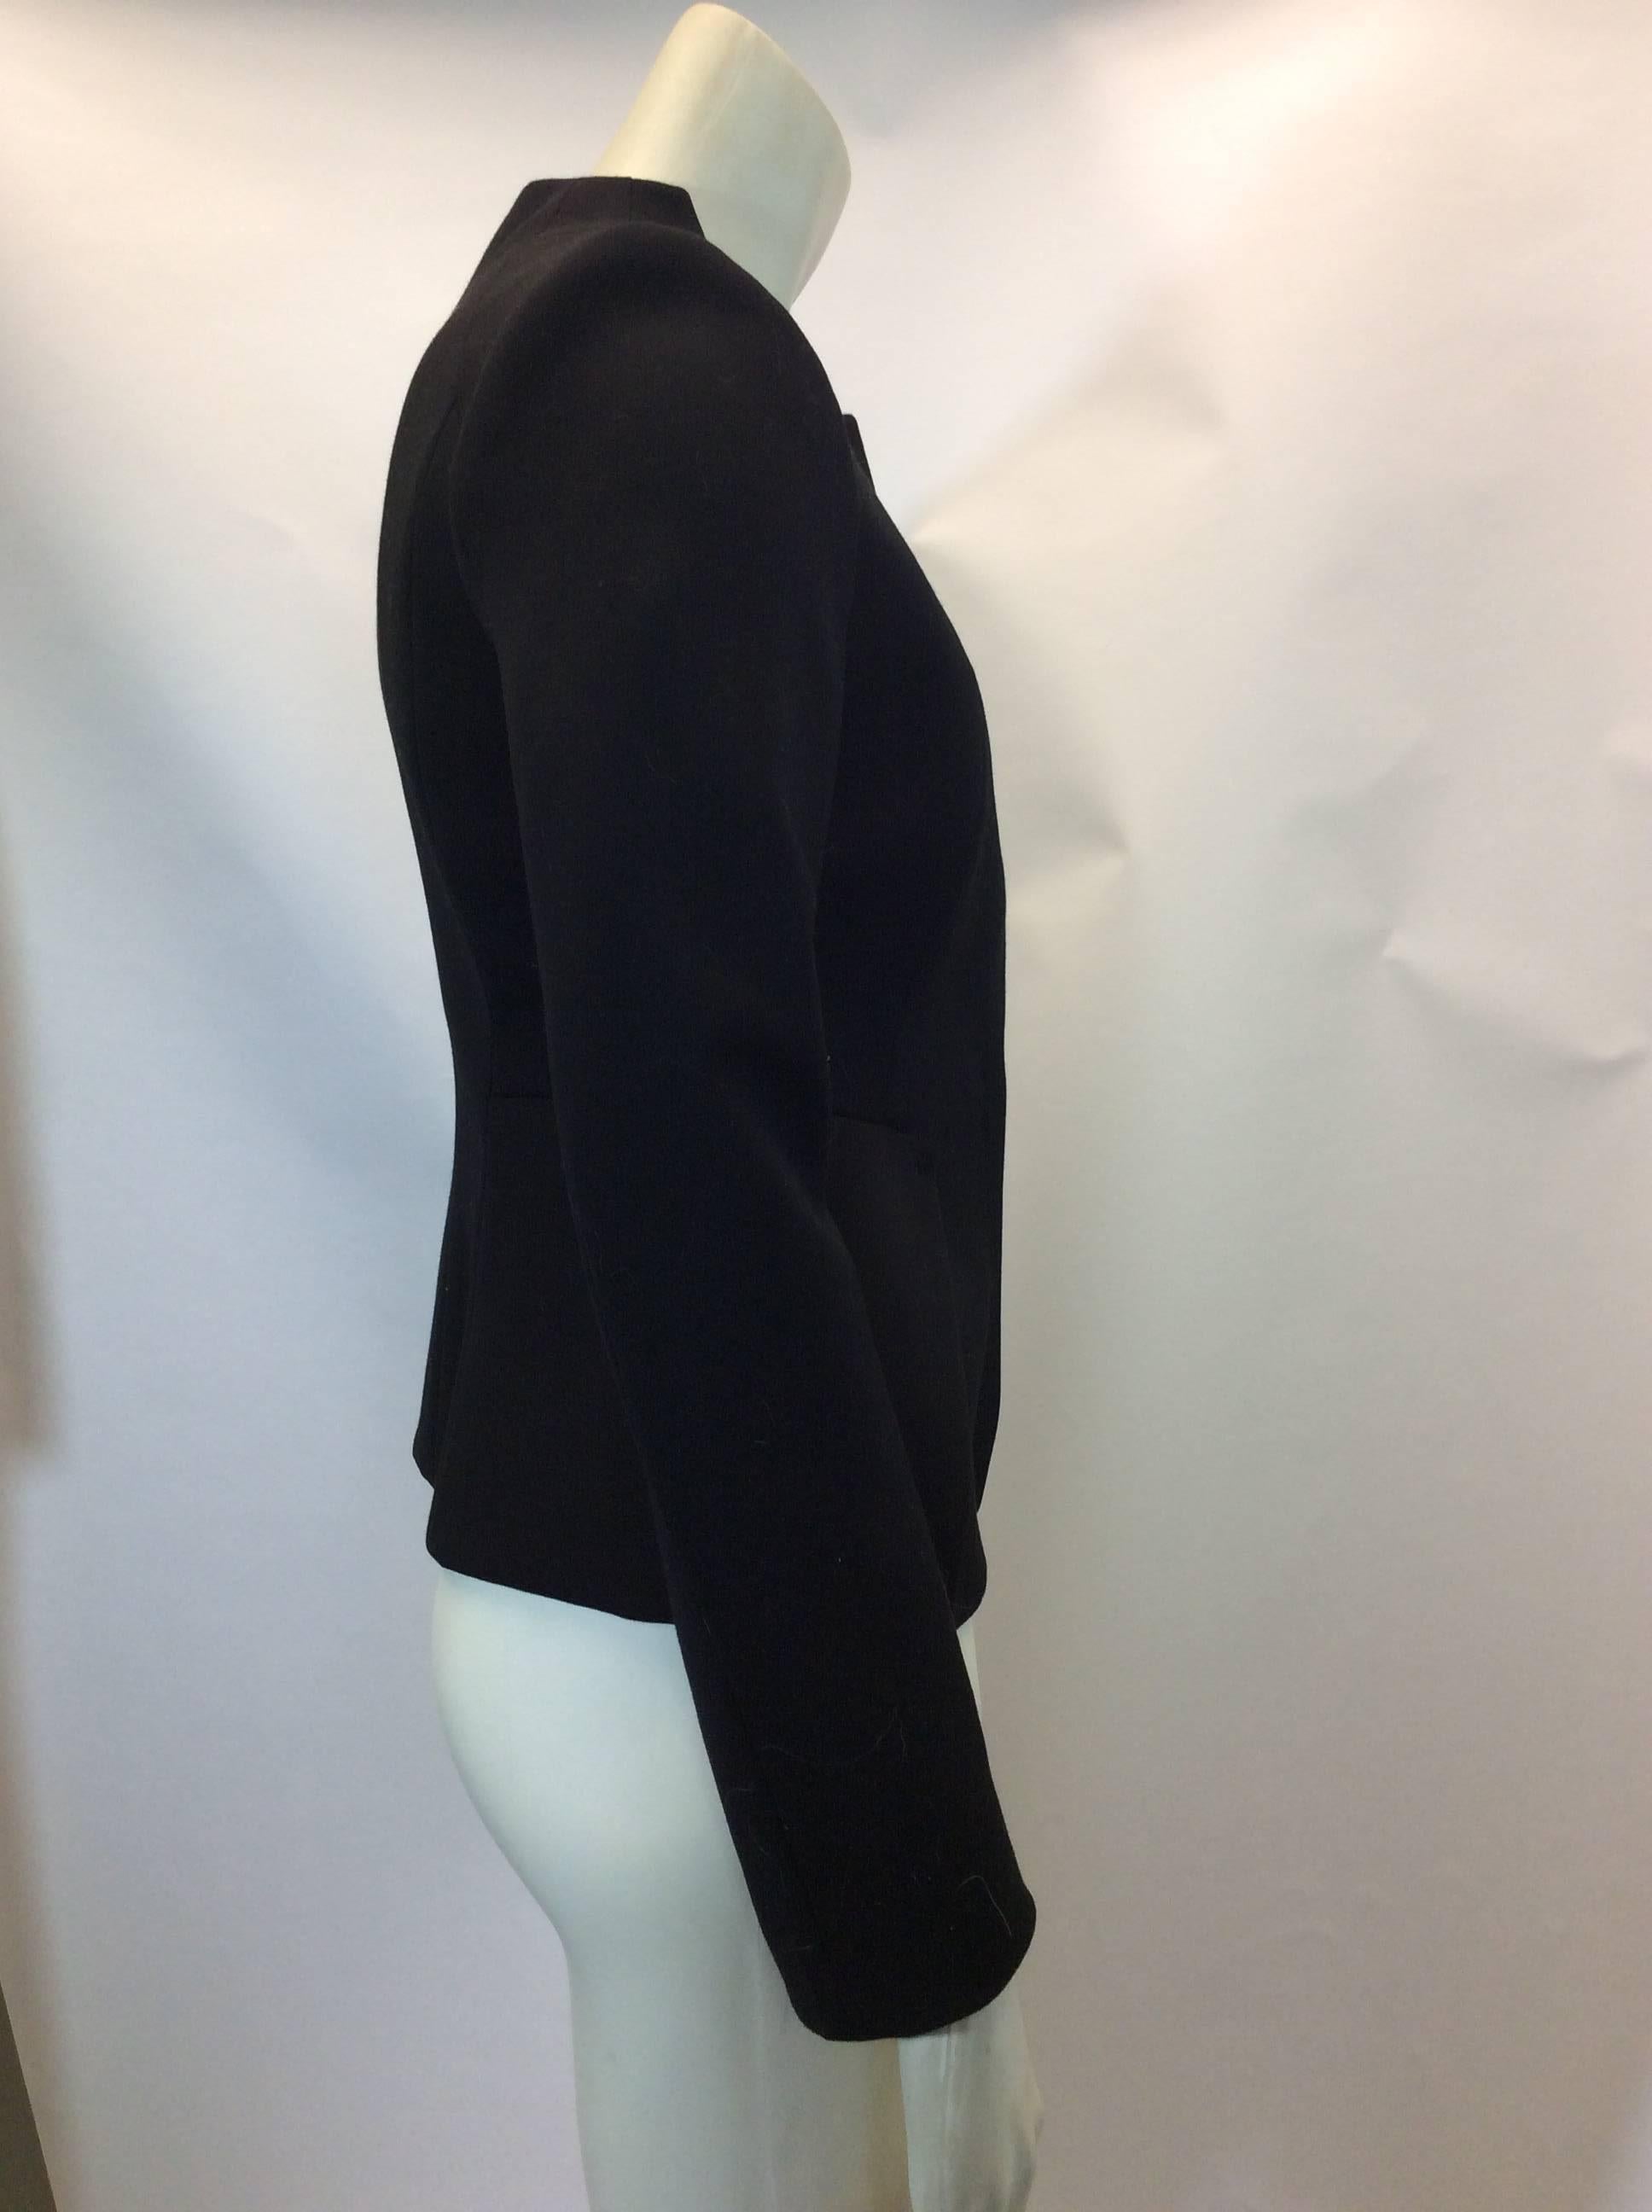 Pucci Black Leather Trim Blazer In Excellent Condition For Sale In Narberth, PA